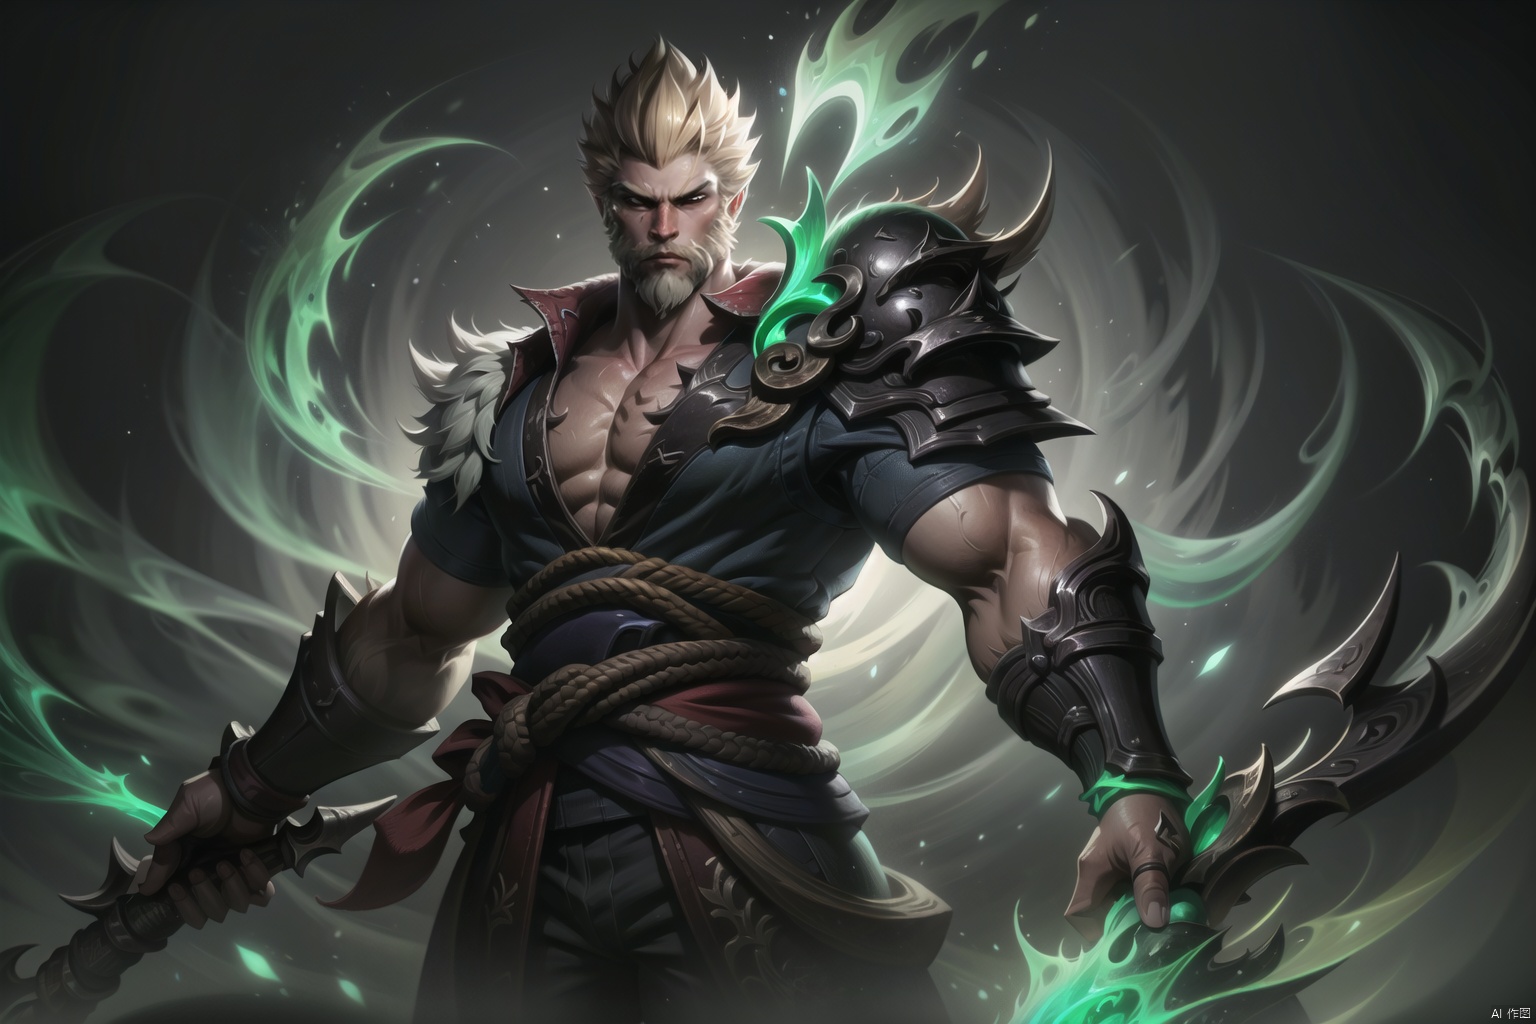  The heroic character in "League of Legends", he wears warrior armor, exudes a green aura, and holds a big knife in his hand. A close-up of a character, this painting adopts the fantasy art style of "League of Legends" illustrations. --ar 128:85, Darius, songoku,black monkey king